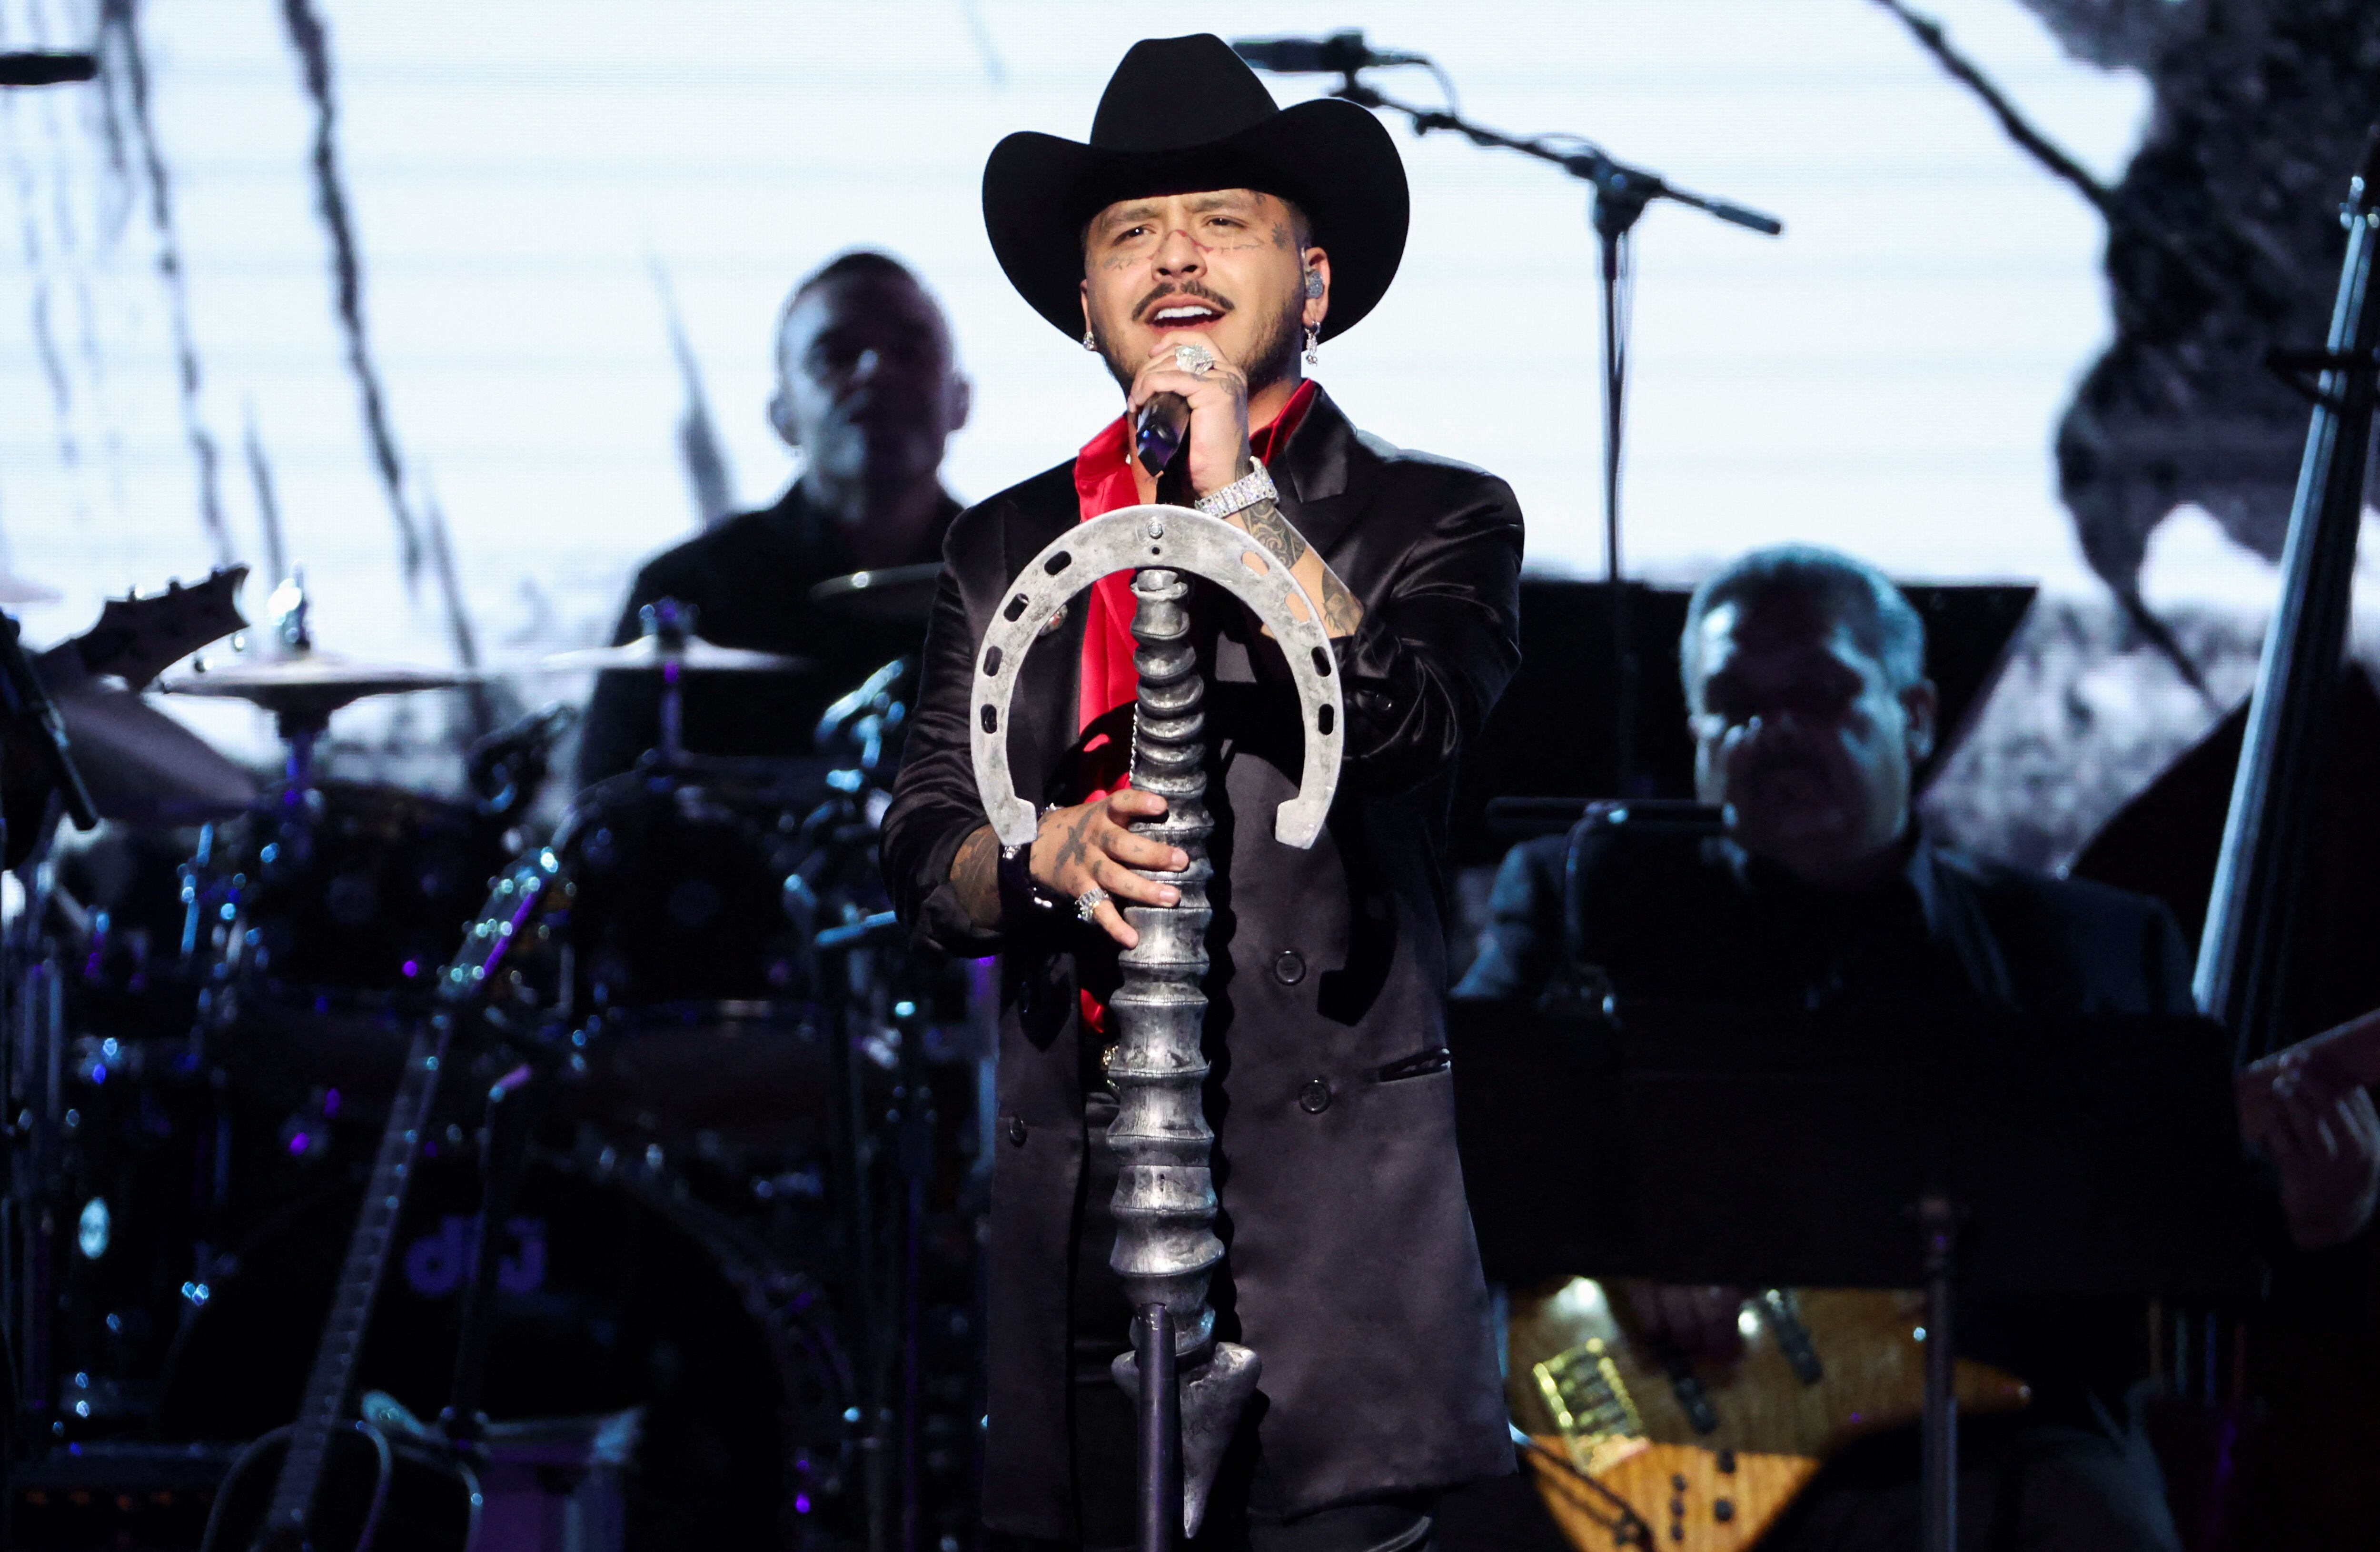 Christian Nodal is one of the special guests and could be presented with a surprise (REUTERS/Mario Anzuoni)